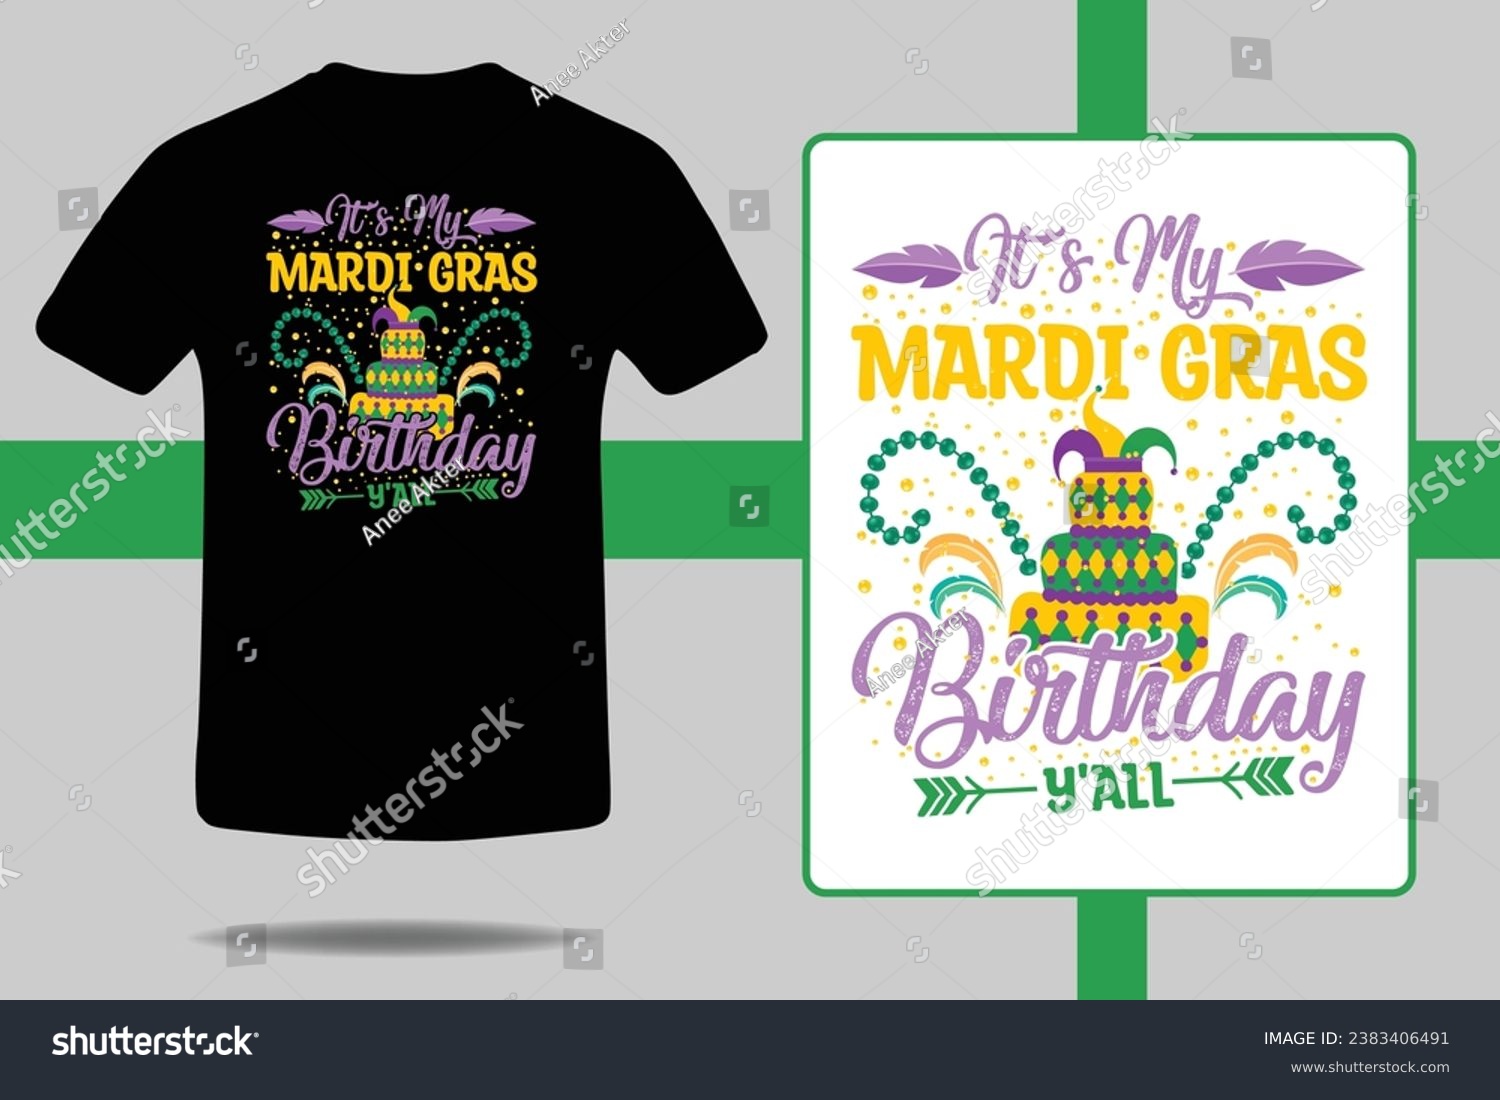 SVG of It's My Mardi Gras Birthday Y'all Shirt, Mardi Gras Gift, Mardi Gras Carnival Party Shirt,Christian feasts, Epiphany, Fat Tuesday Shirt, New Orleans Shirt,Parade Shirt svg